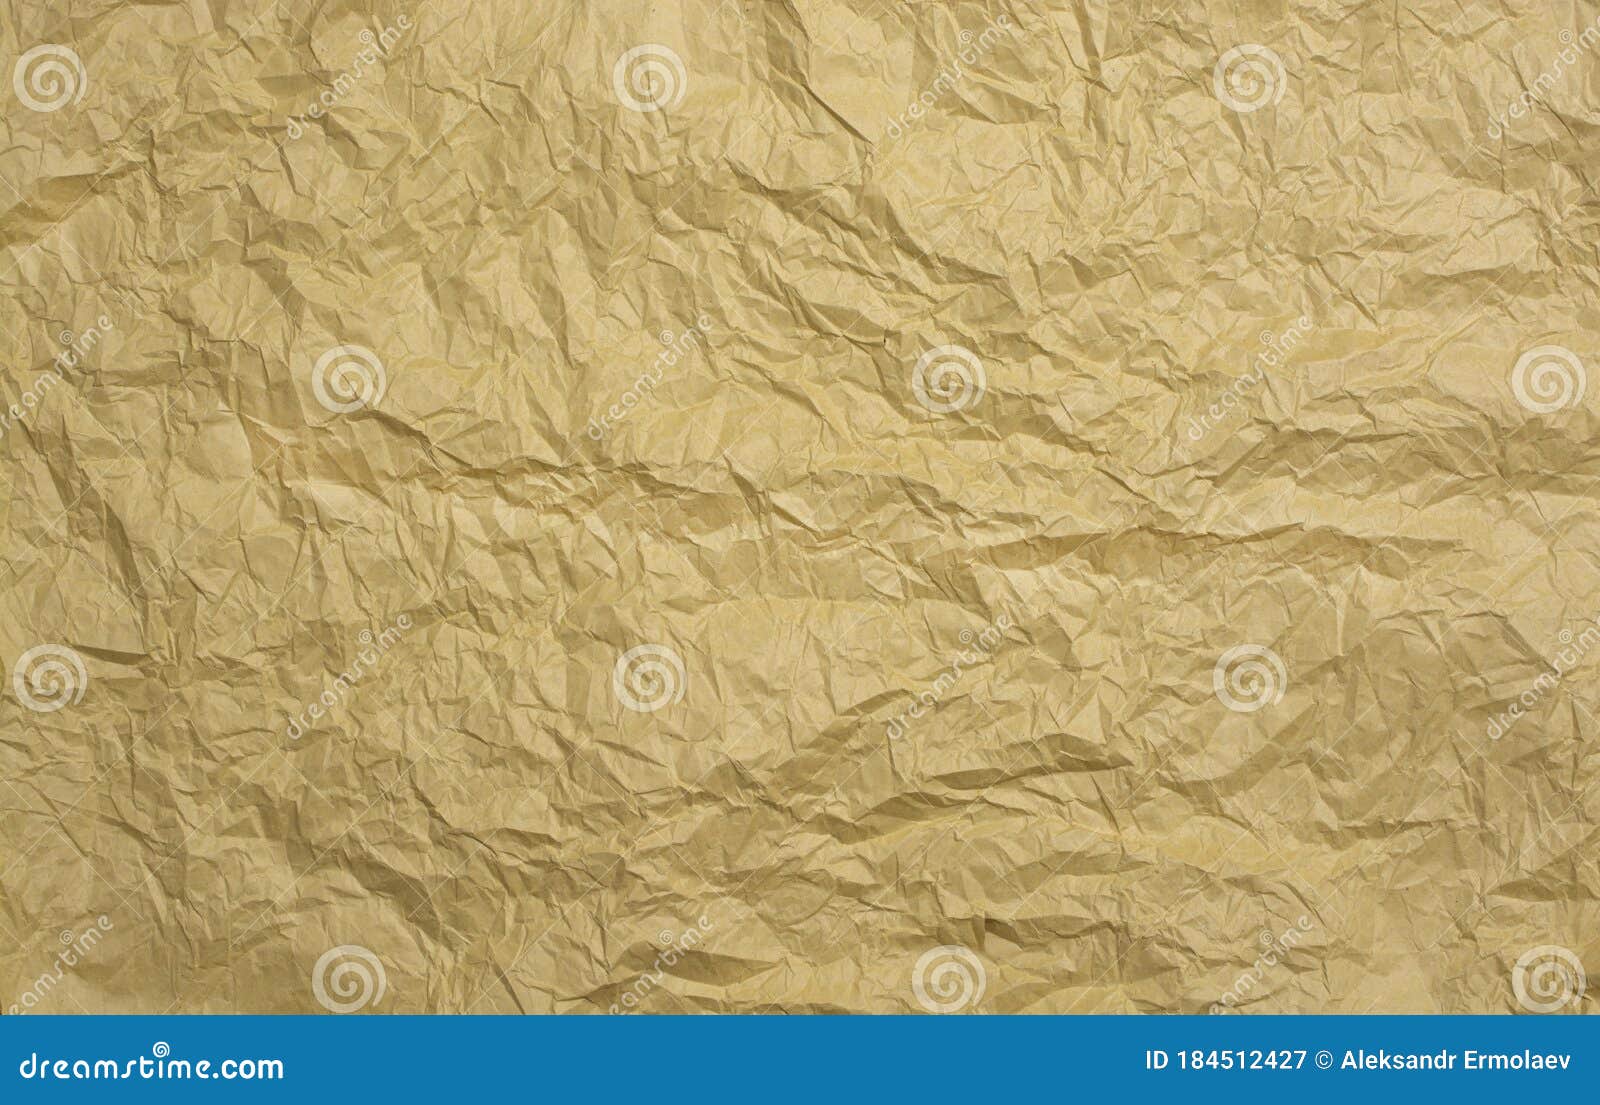 Recycled Old Crumpled Paper Background or Texture. Stock Image - Image of  arts, paper: 184512427